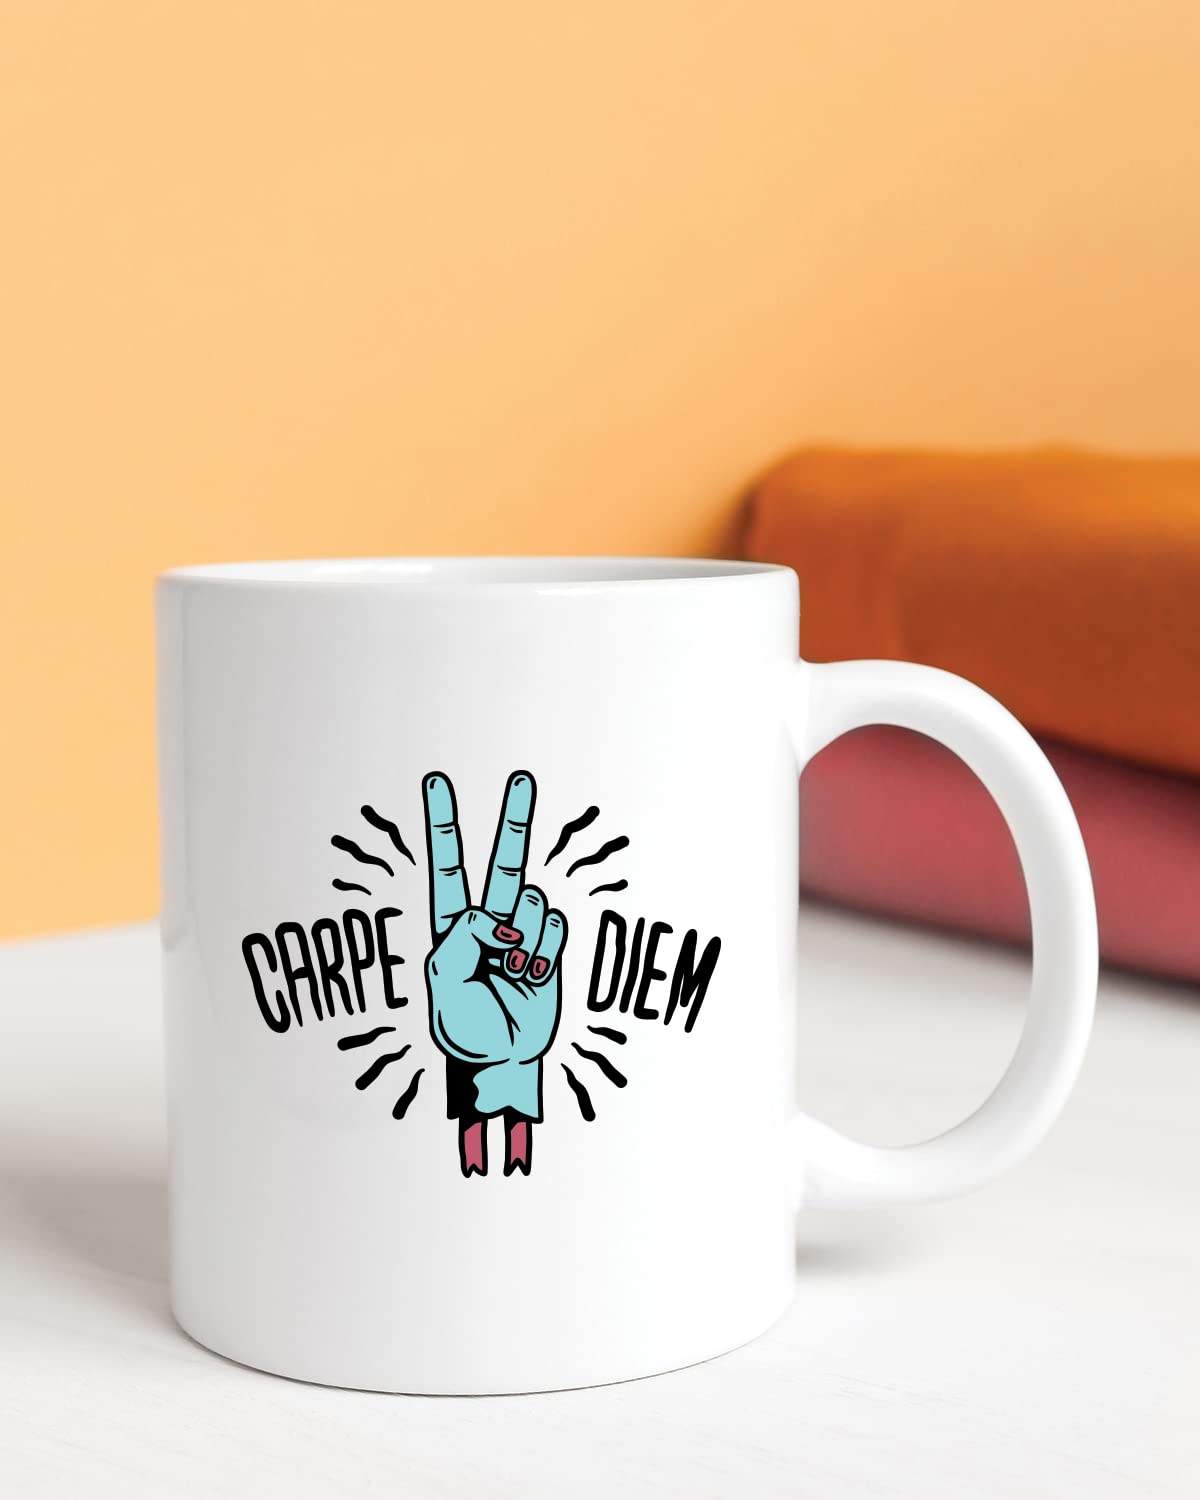 Carpe Diem Coffee Mug - Birthday Gift, Motivational Mug, Printed with Inspiring Quotes, Positivity Mug, Inspirational Gift for Him & Her, Best Friend Gift, Gifts for Her, Cheer Up Gift